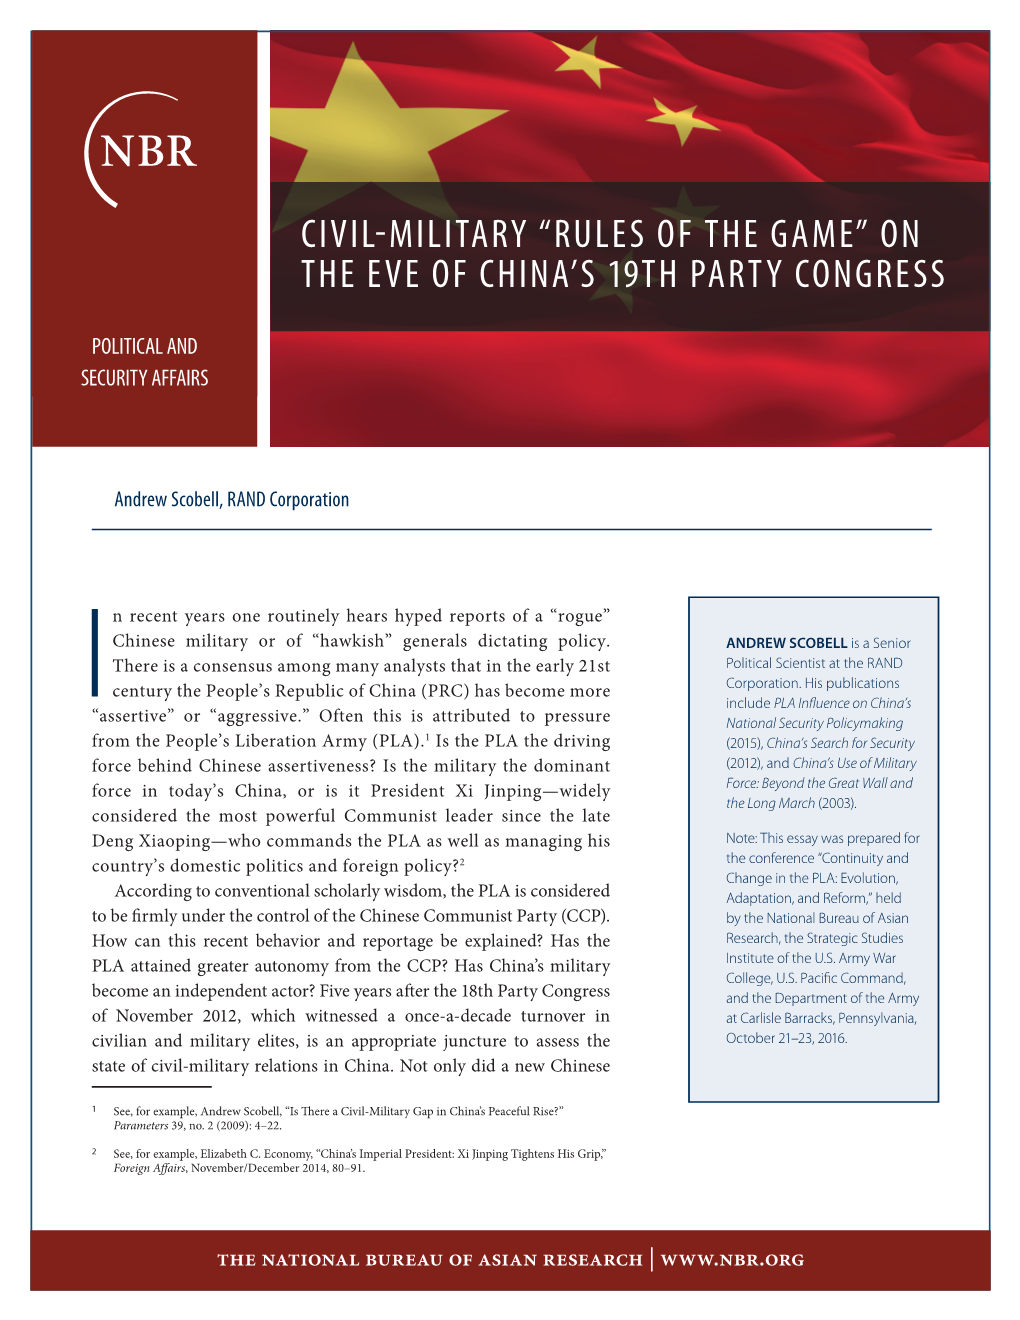 Civil-Military “Rules of the Game” on the Eve of China's 19Th Party Congress